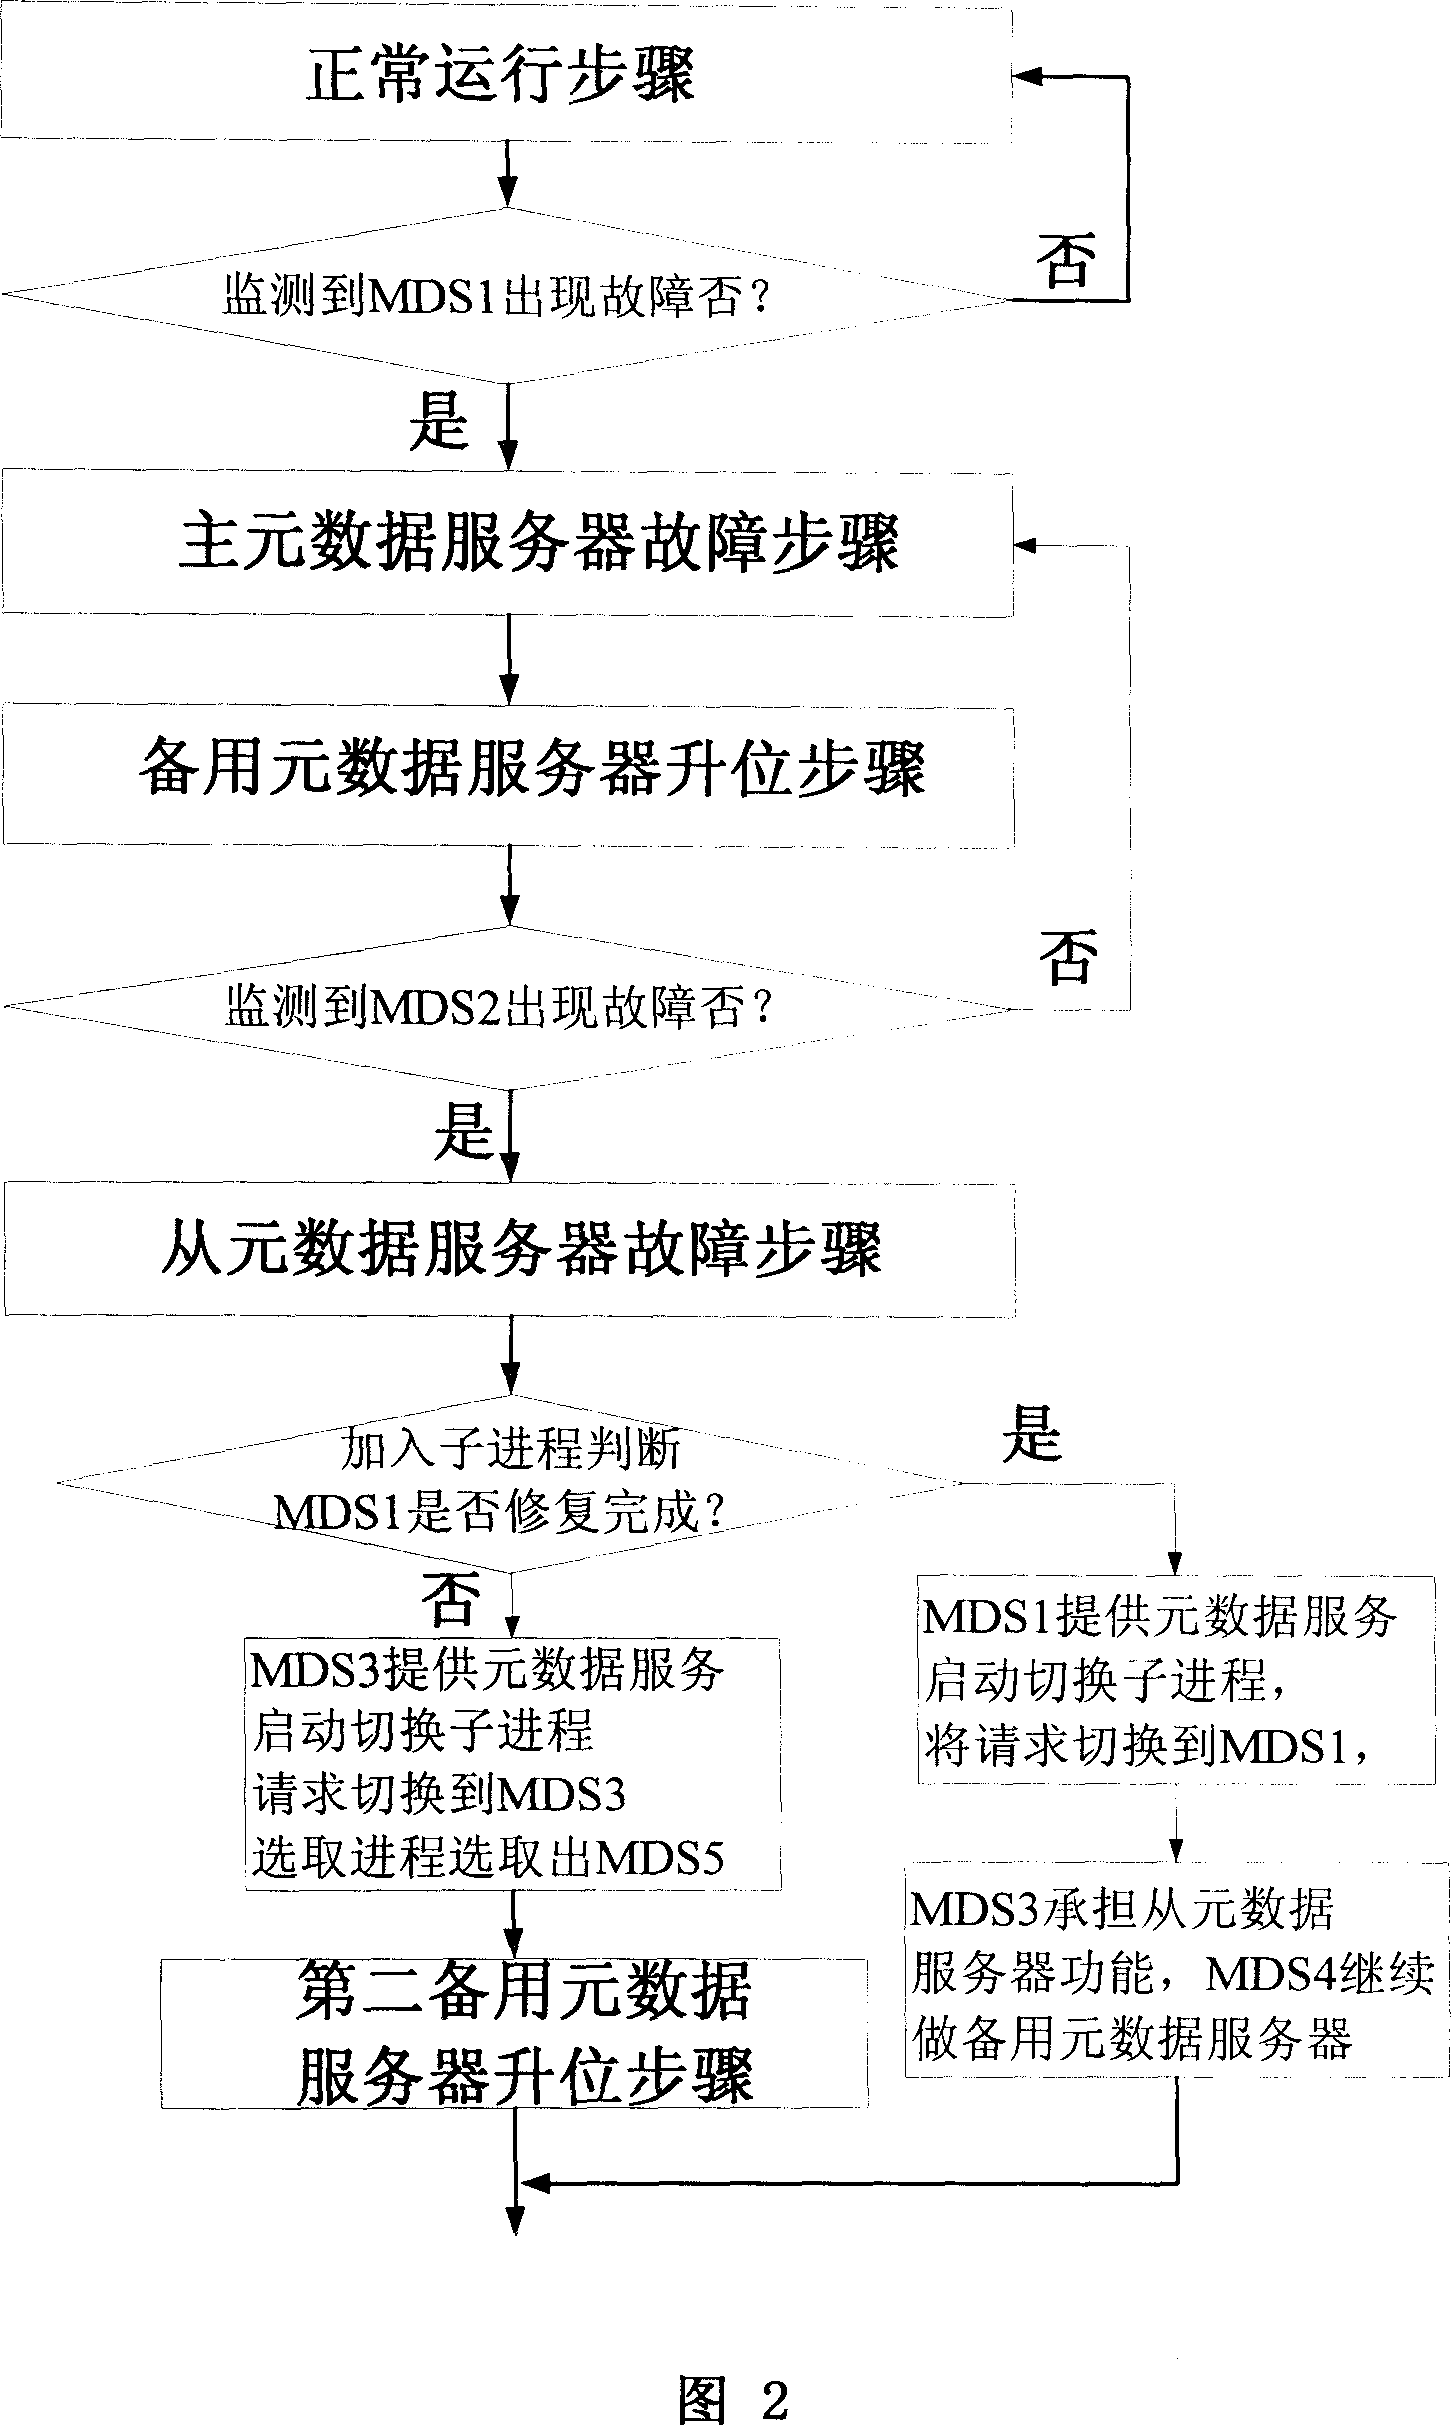 Method and system for promoting metadata service reliability